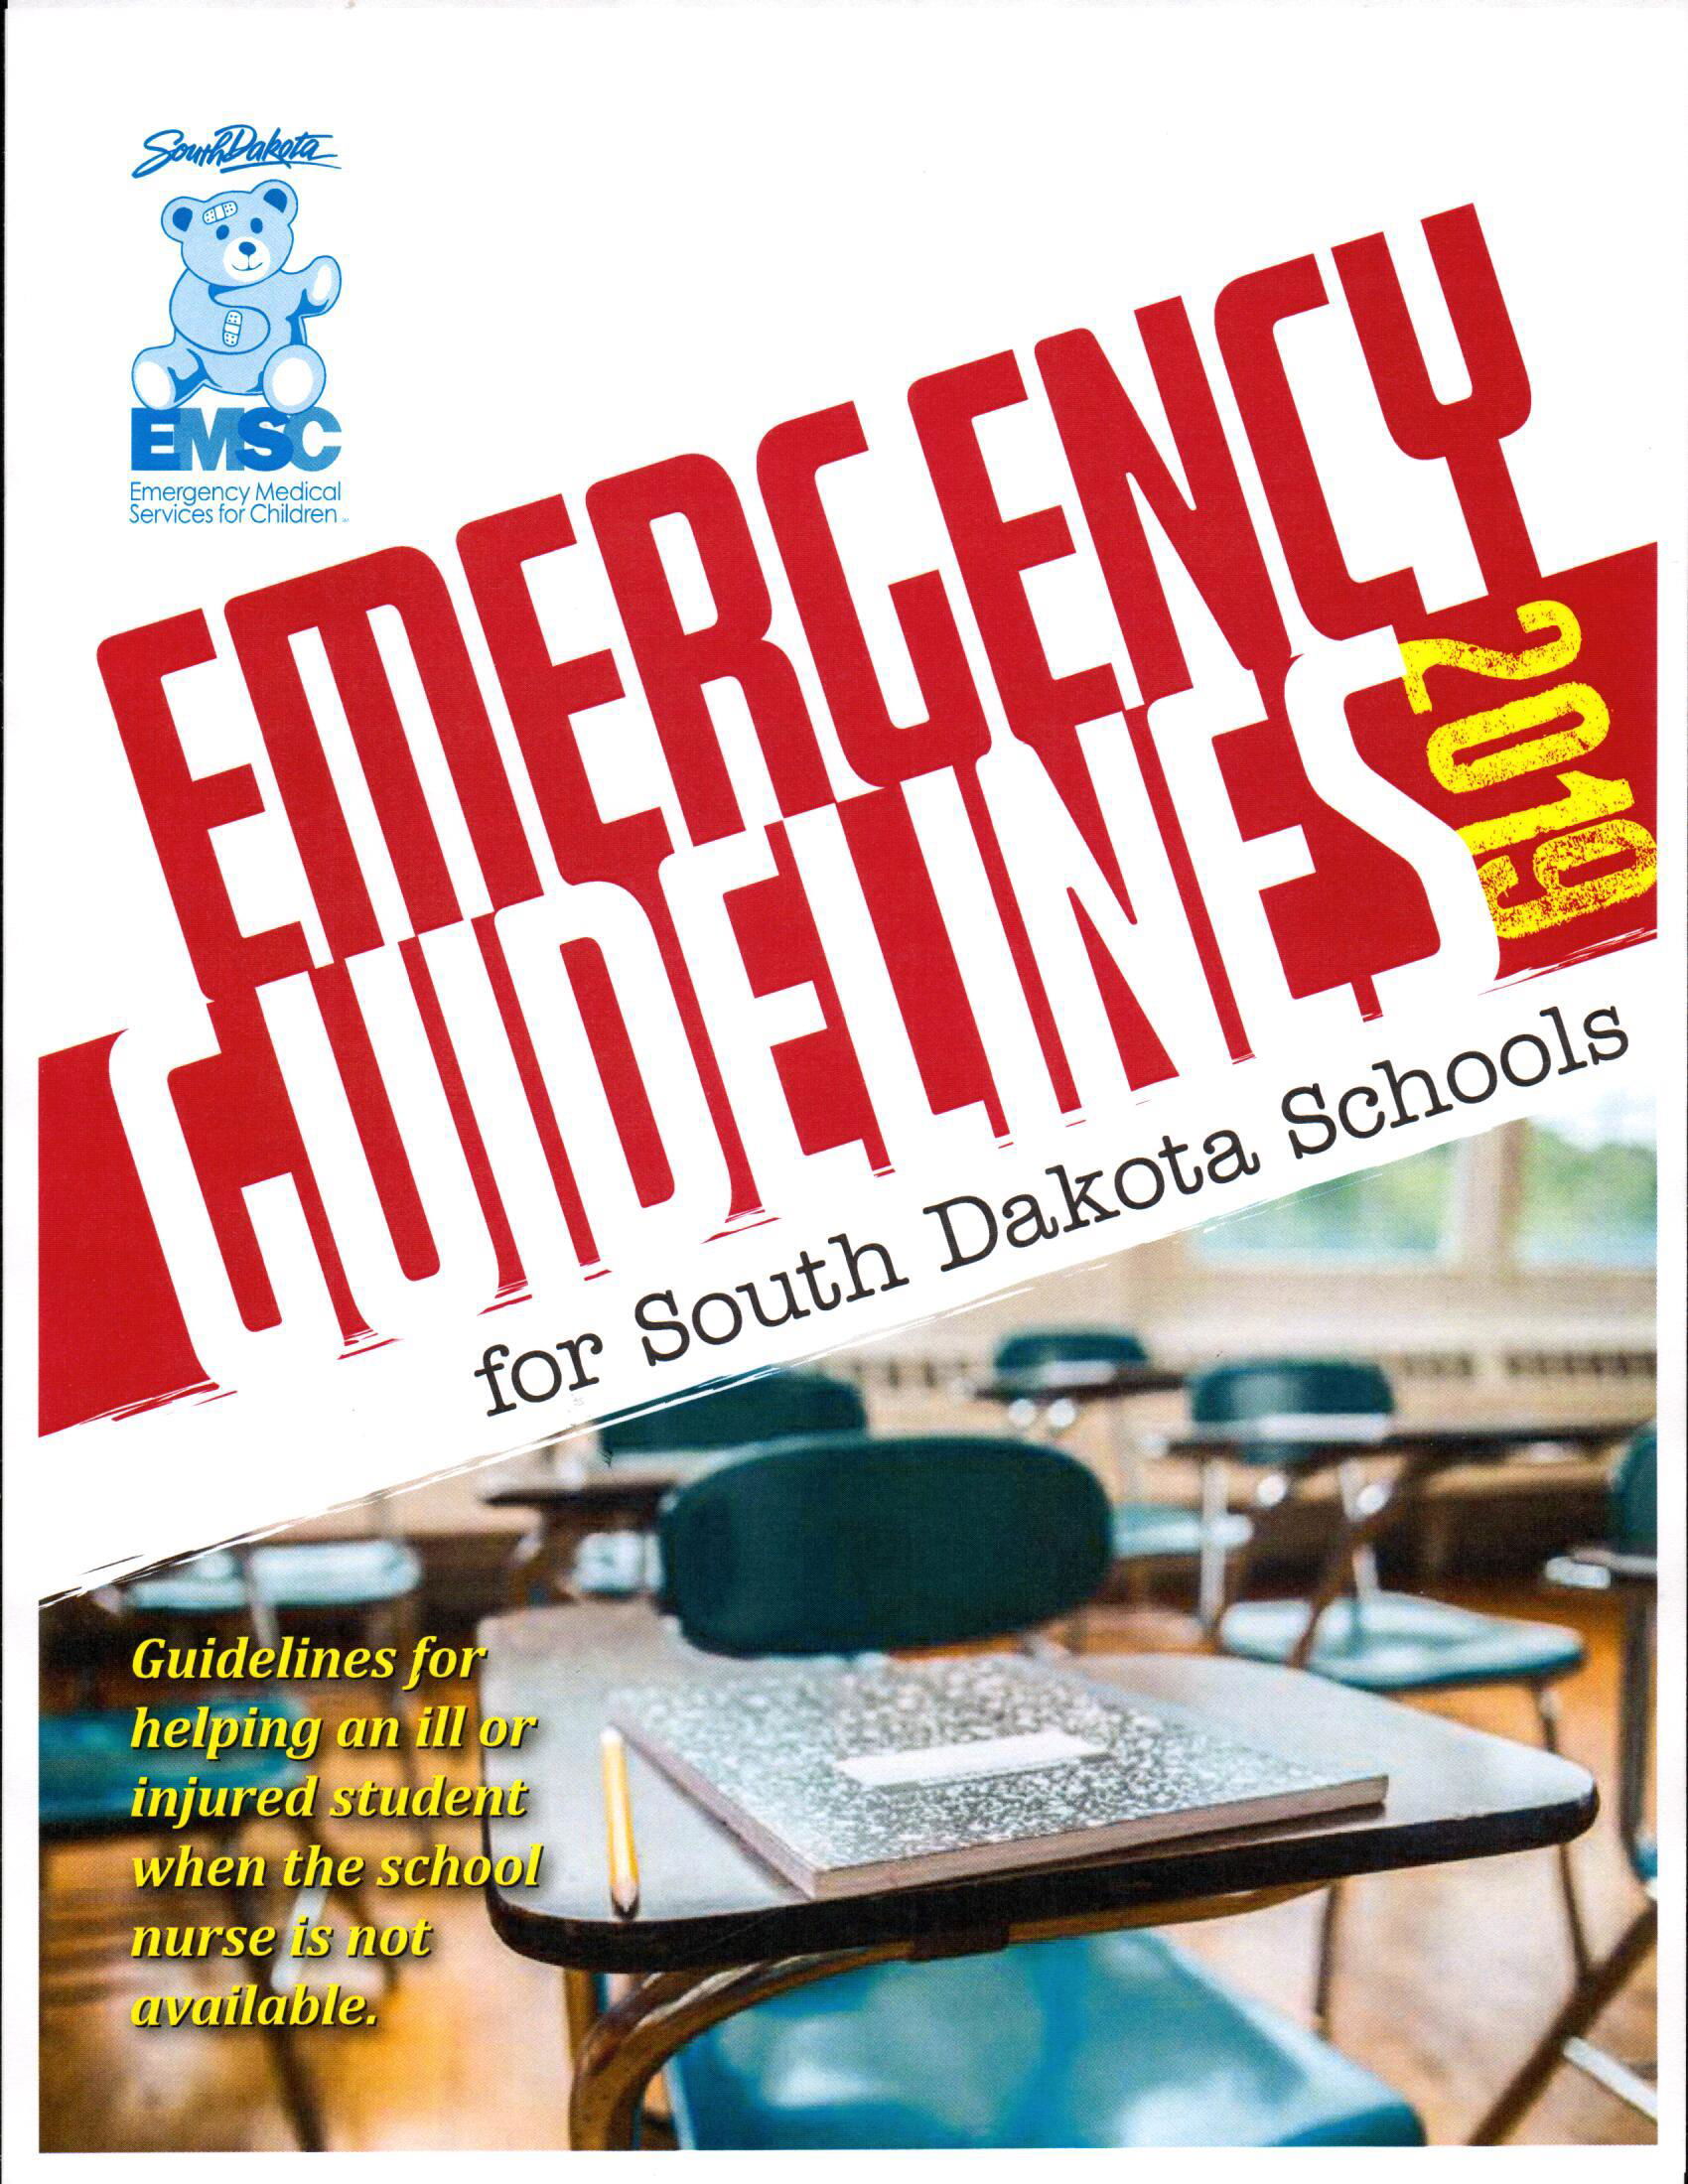 Emergency Guidelines for Schools